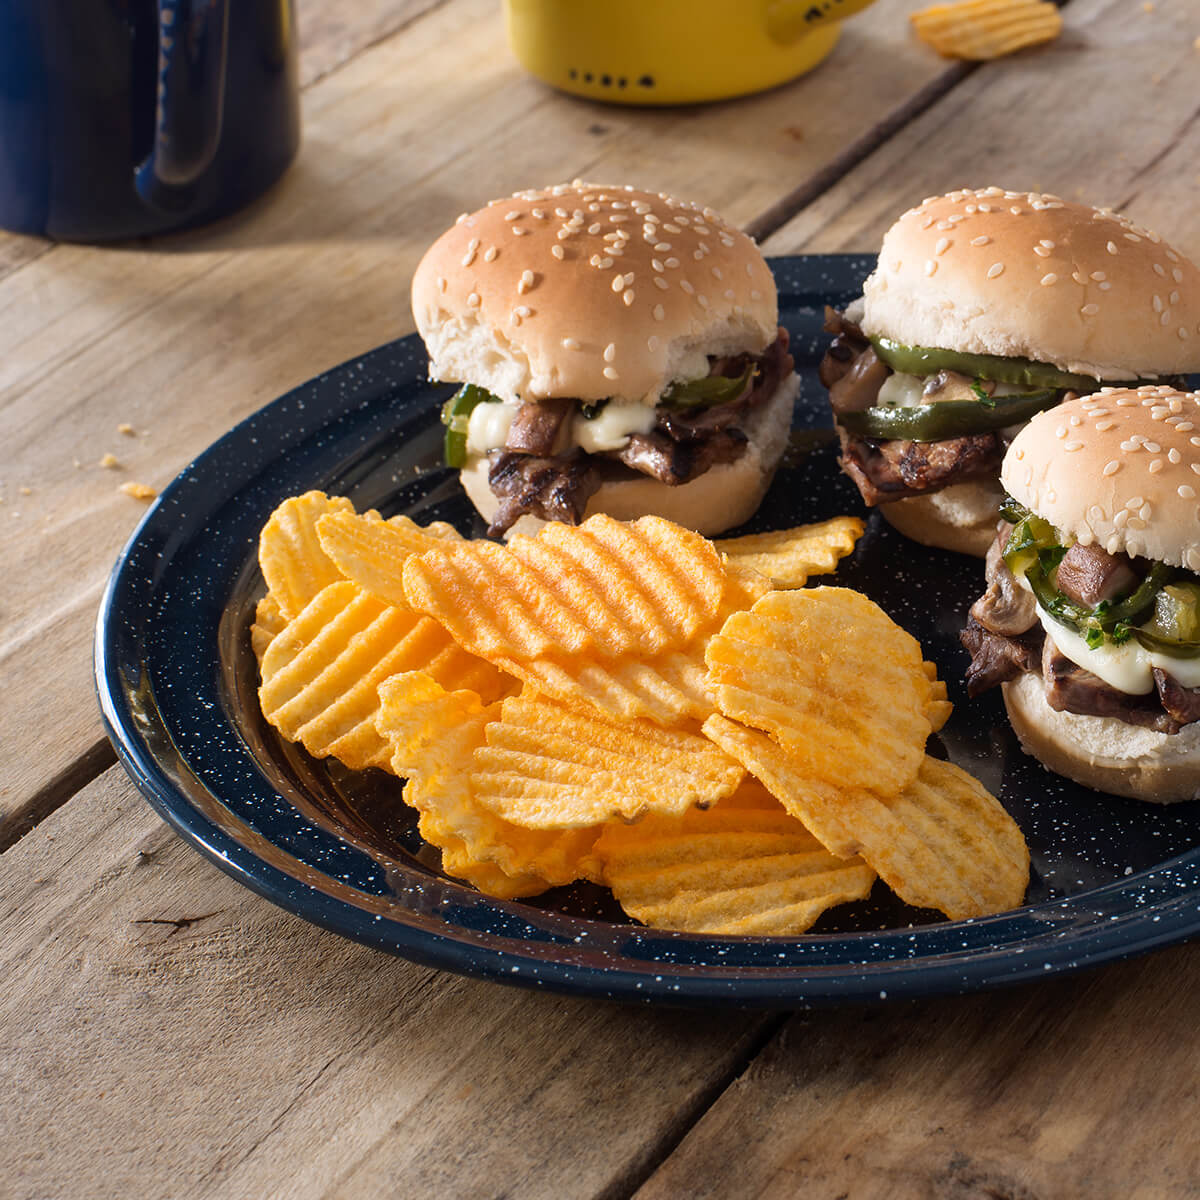 LAY'S Cheddar and Sour Cream Philly Cheesesteak Sliders